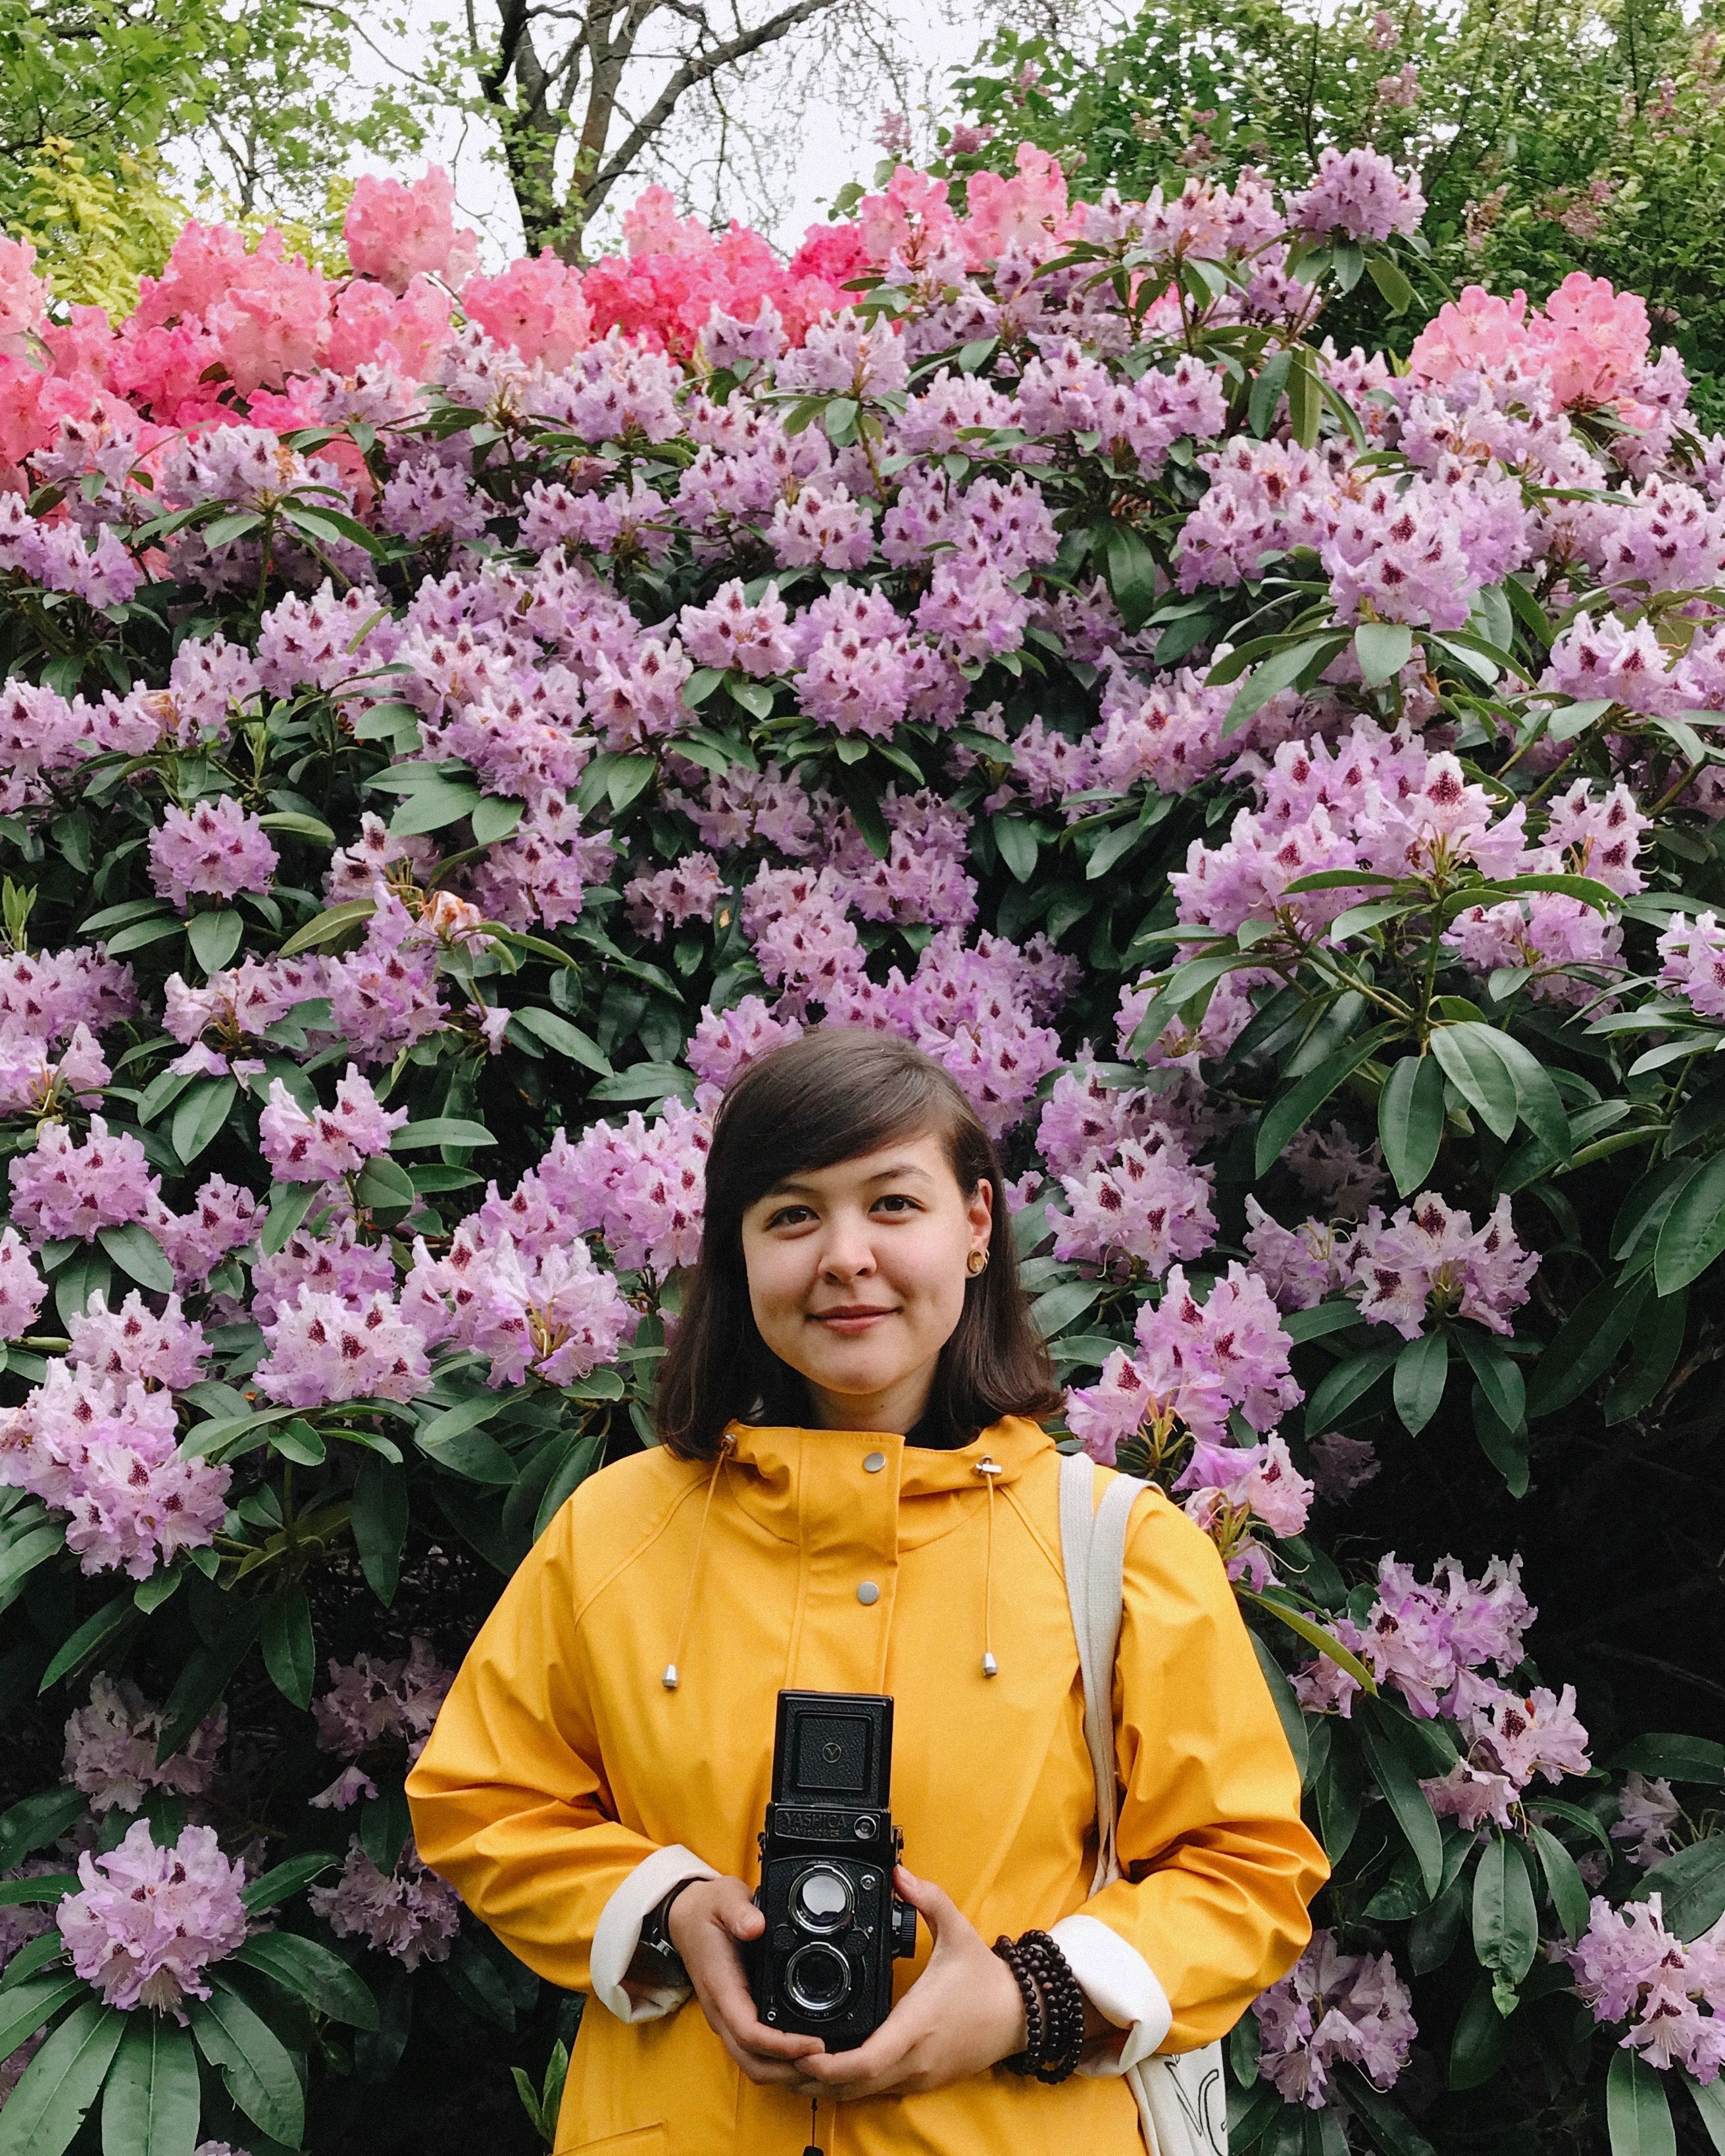 The image shows a person holding a camera outdoors. She is wearing a yellow jacket and the background includes a tree and flowers. The colors pink and purple are present in the image, suggesting a springtime setting.